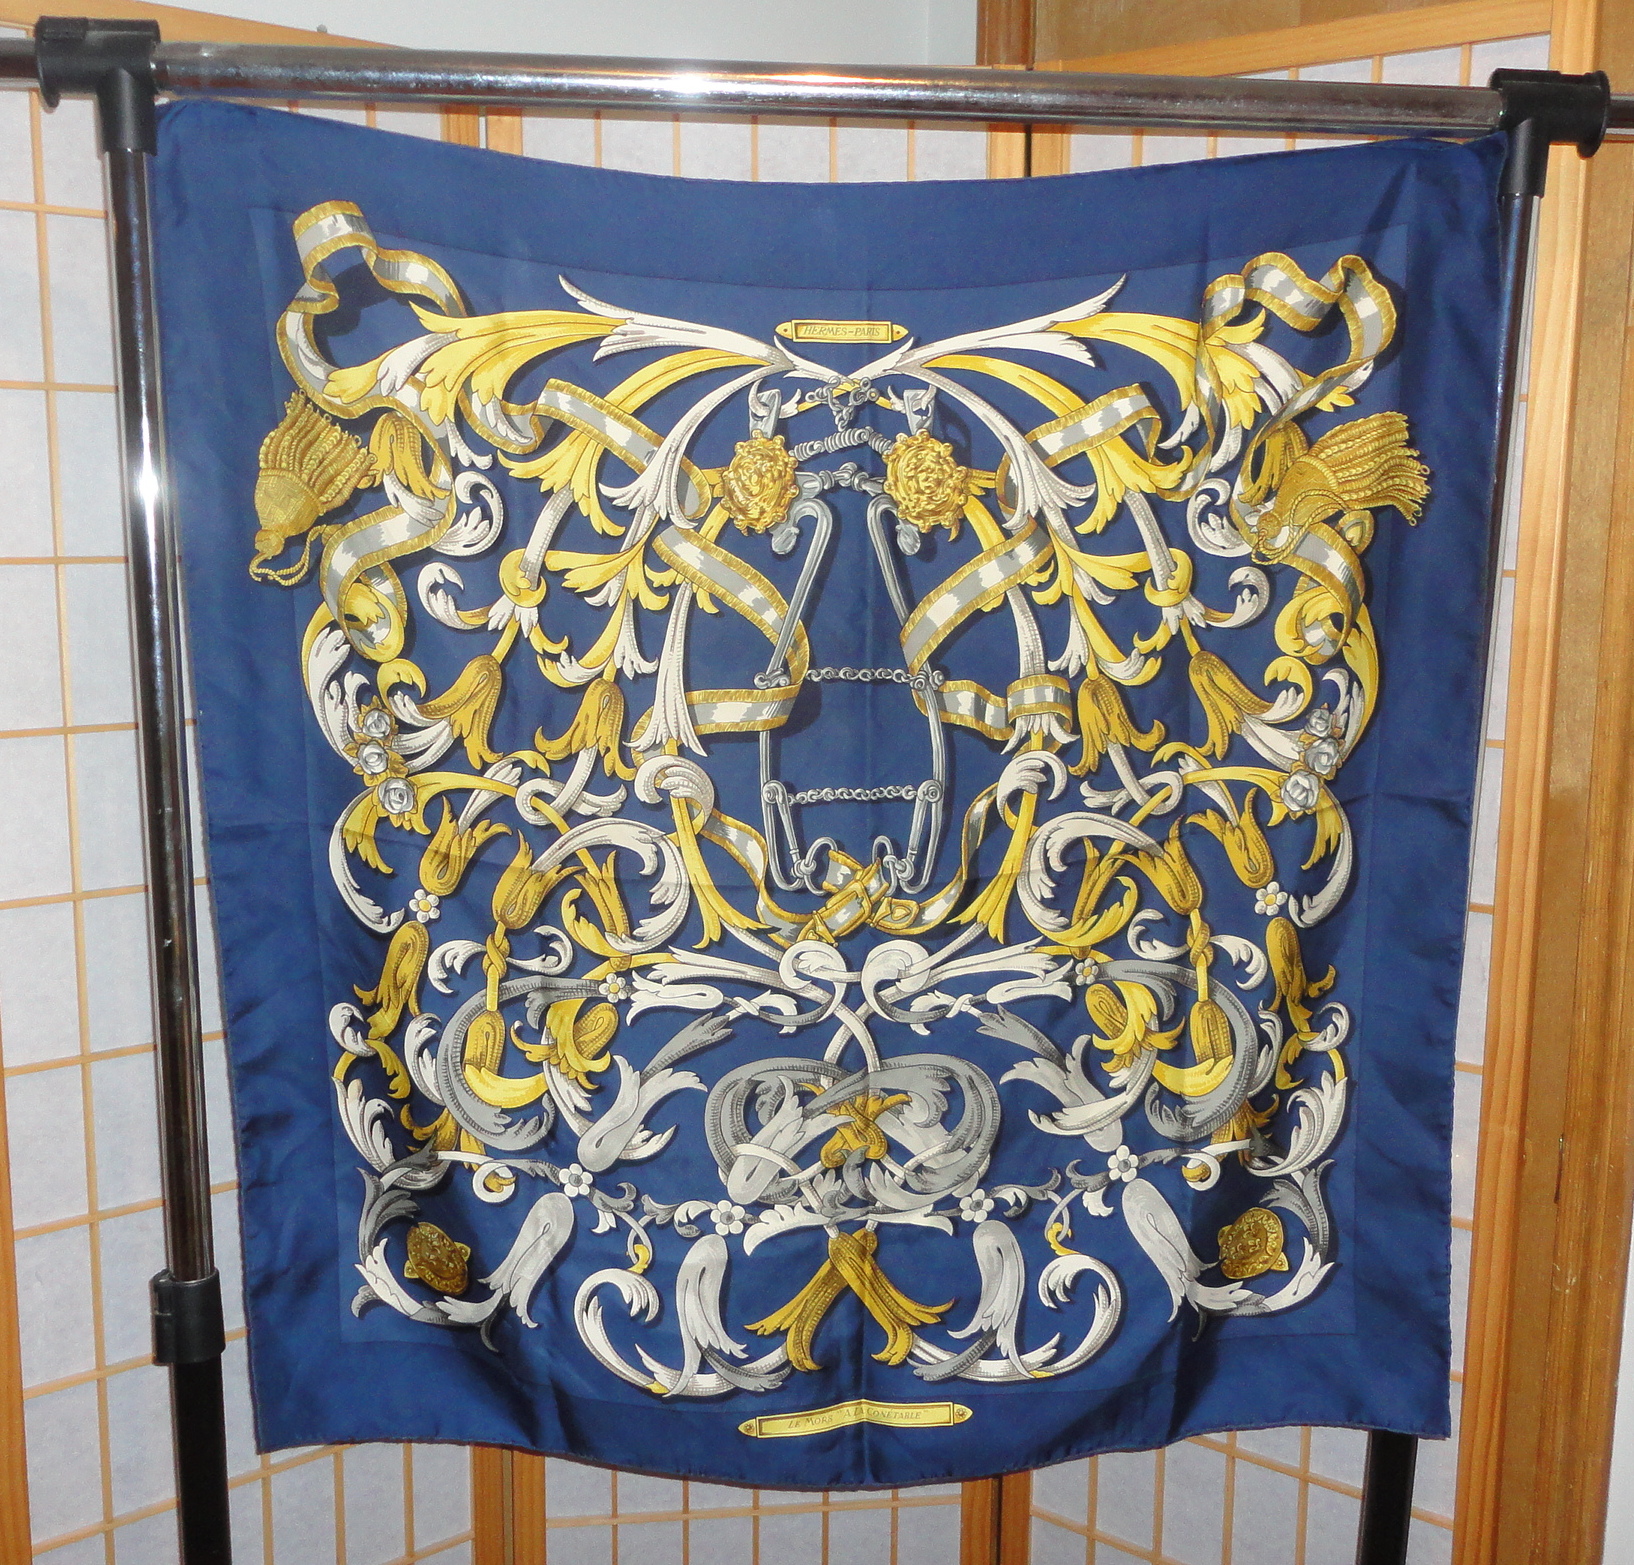 Hermes Scarf - Real or Fake? - The eBay 